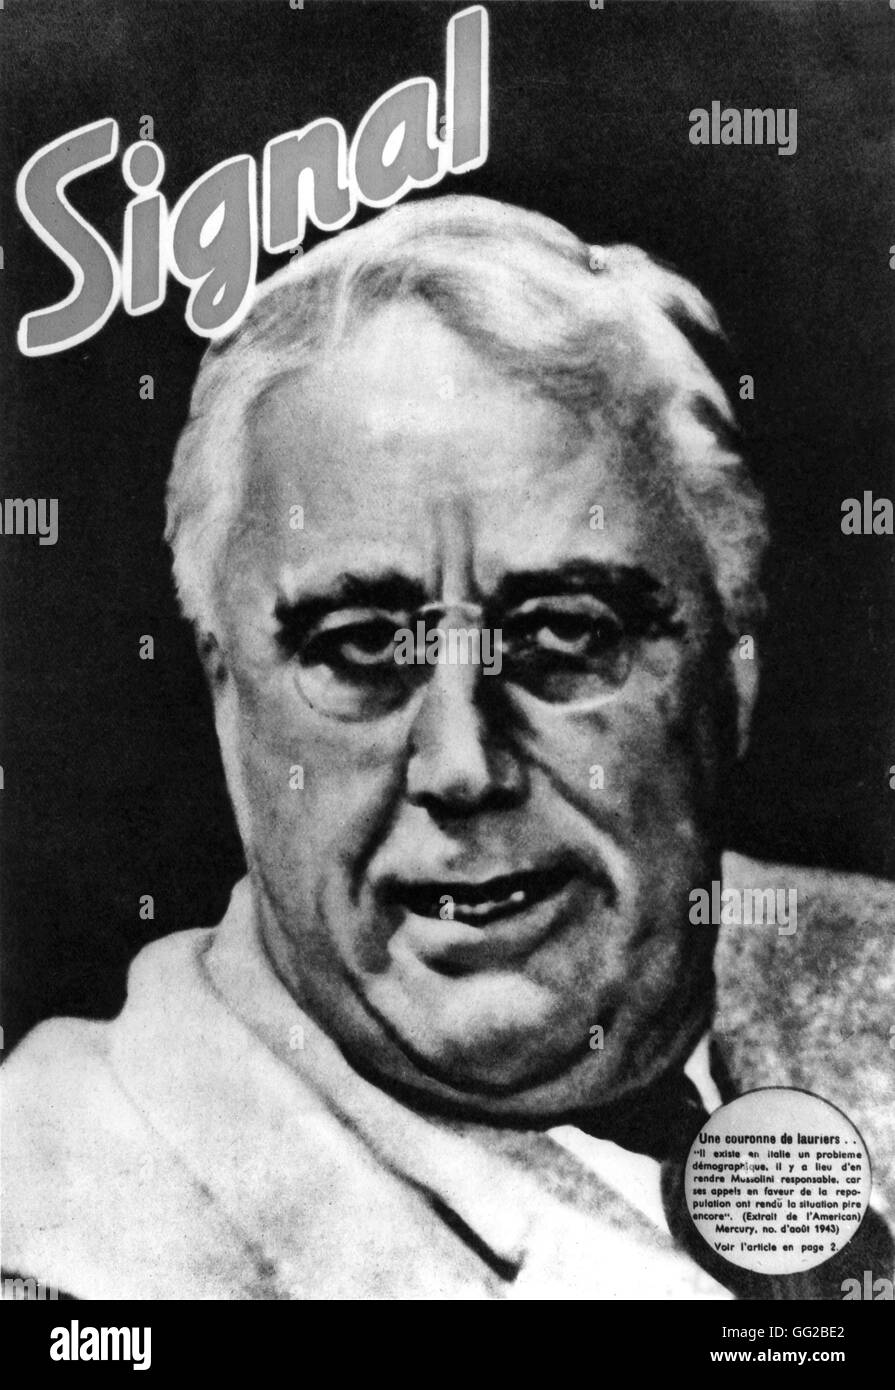 Portrait of President Roosevelt on the front page of 'Signal' magazine November 1943 United States - World War II Stock Photo